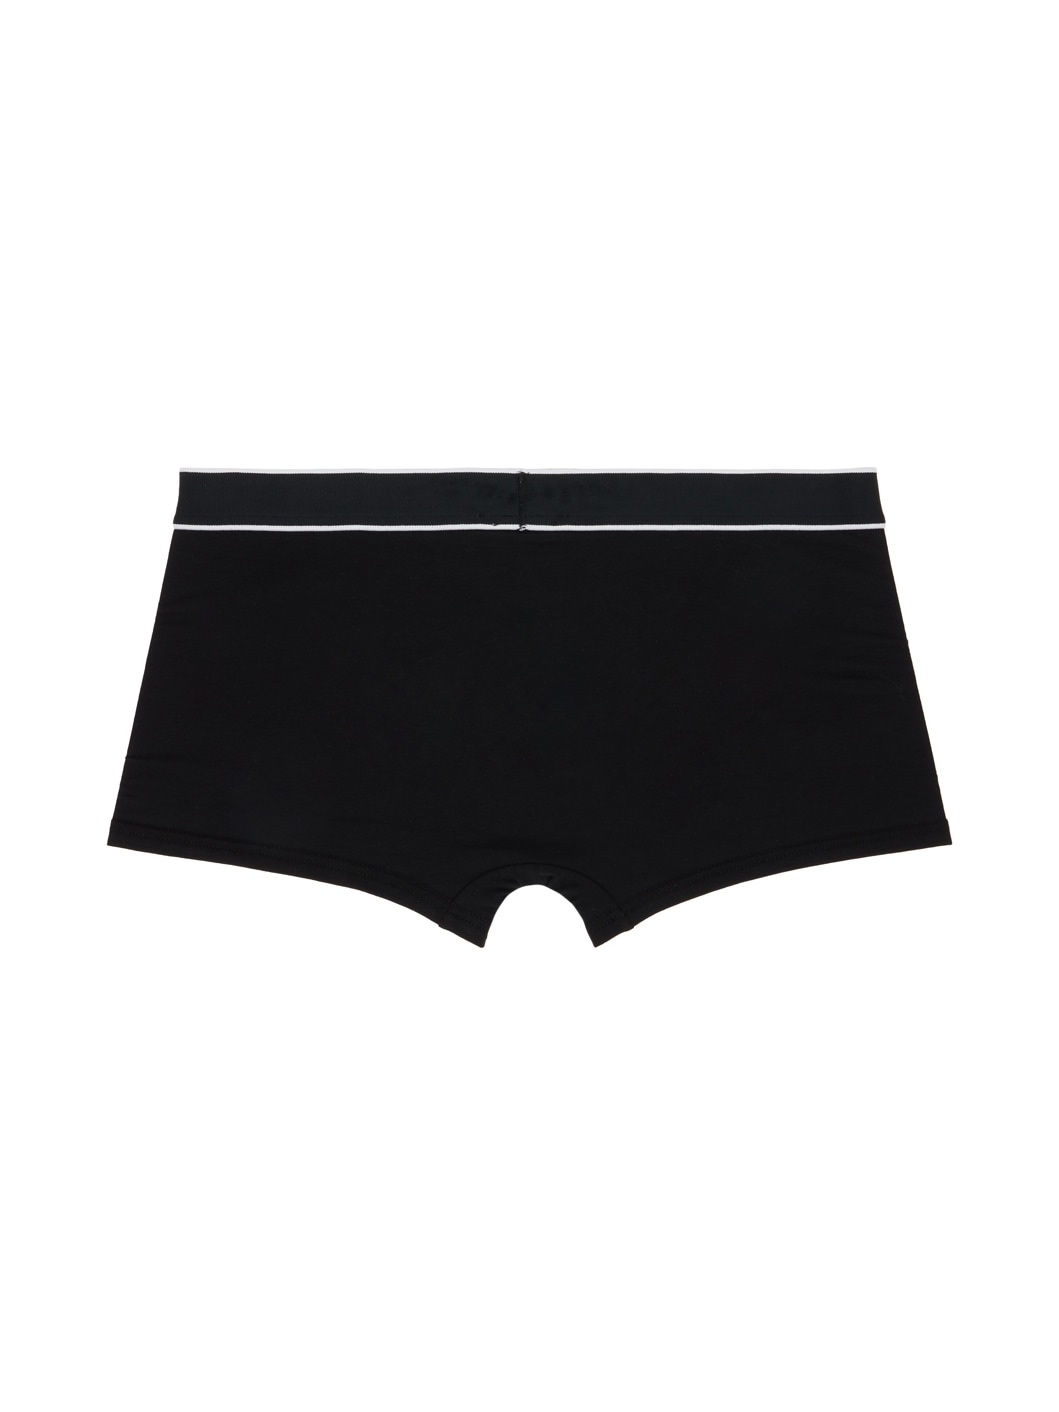 Two-Pack Black Off-Stamp Boxers - 3